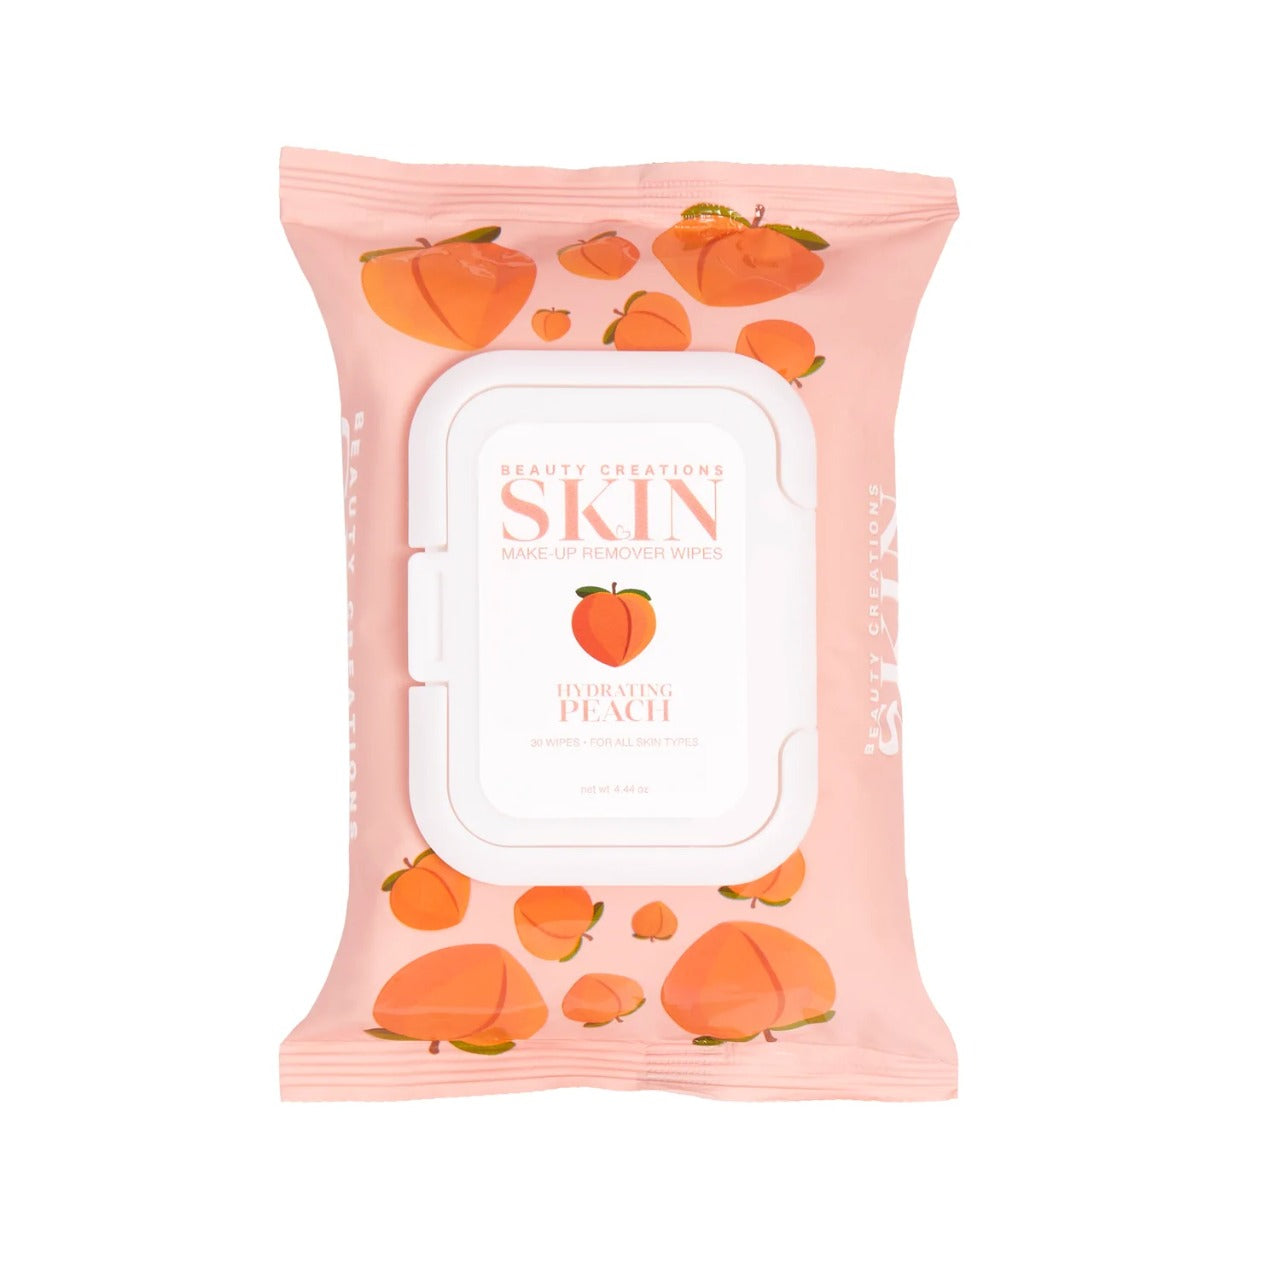 Skin - Makeup Remover Wipes